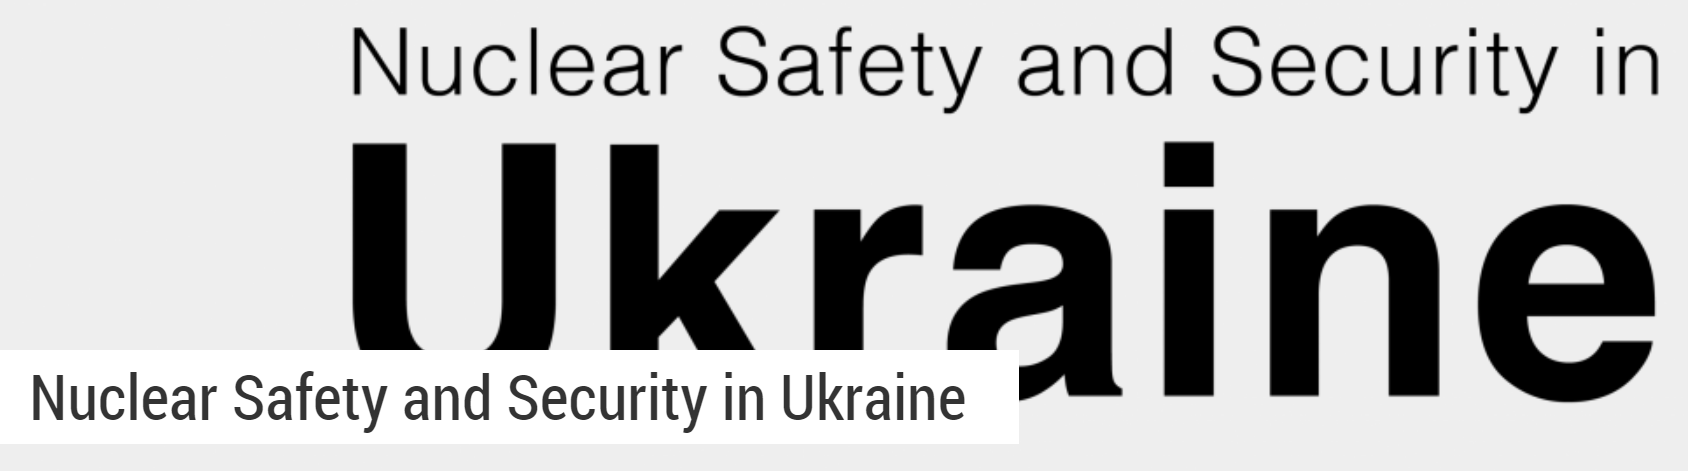 Nuclear Safety and Security in Ukraine